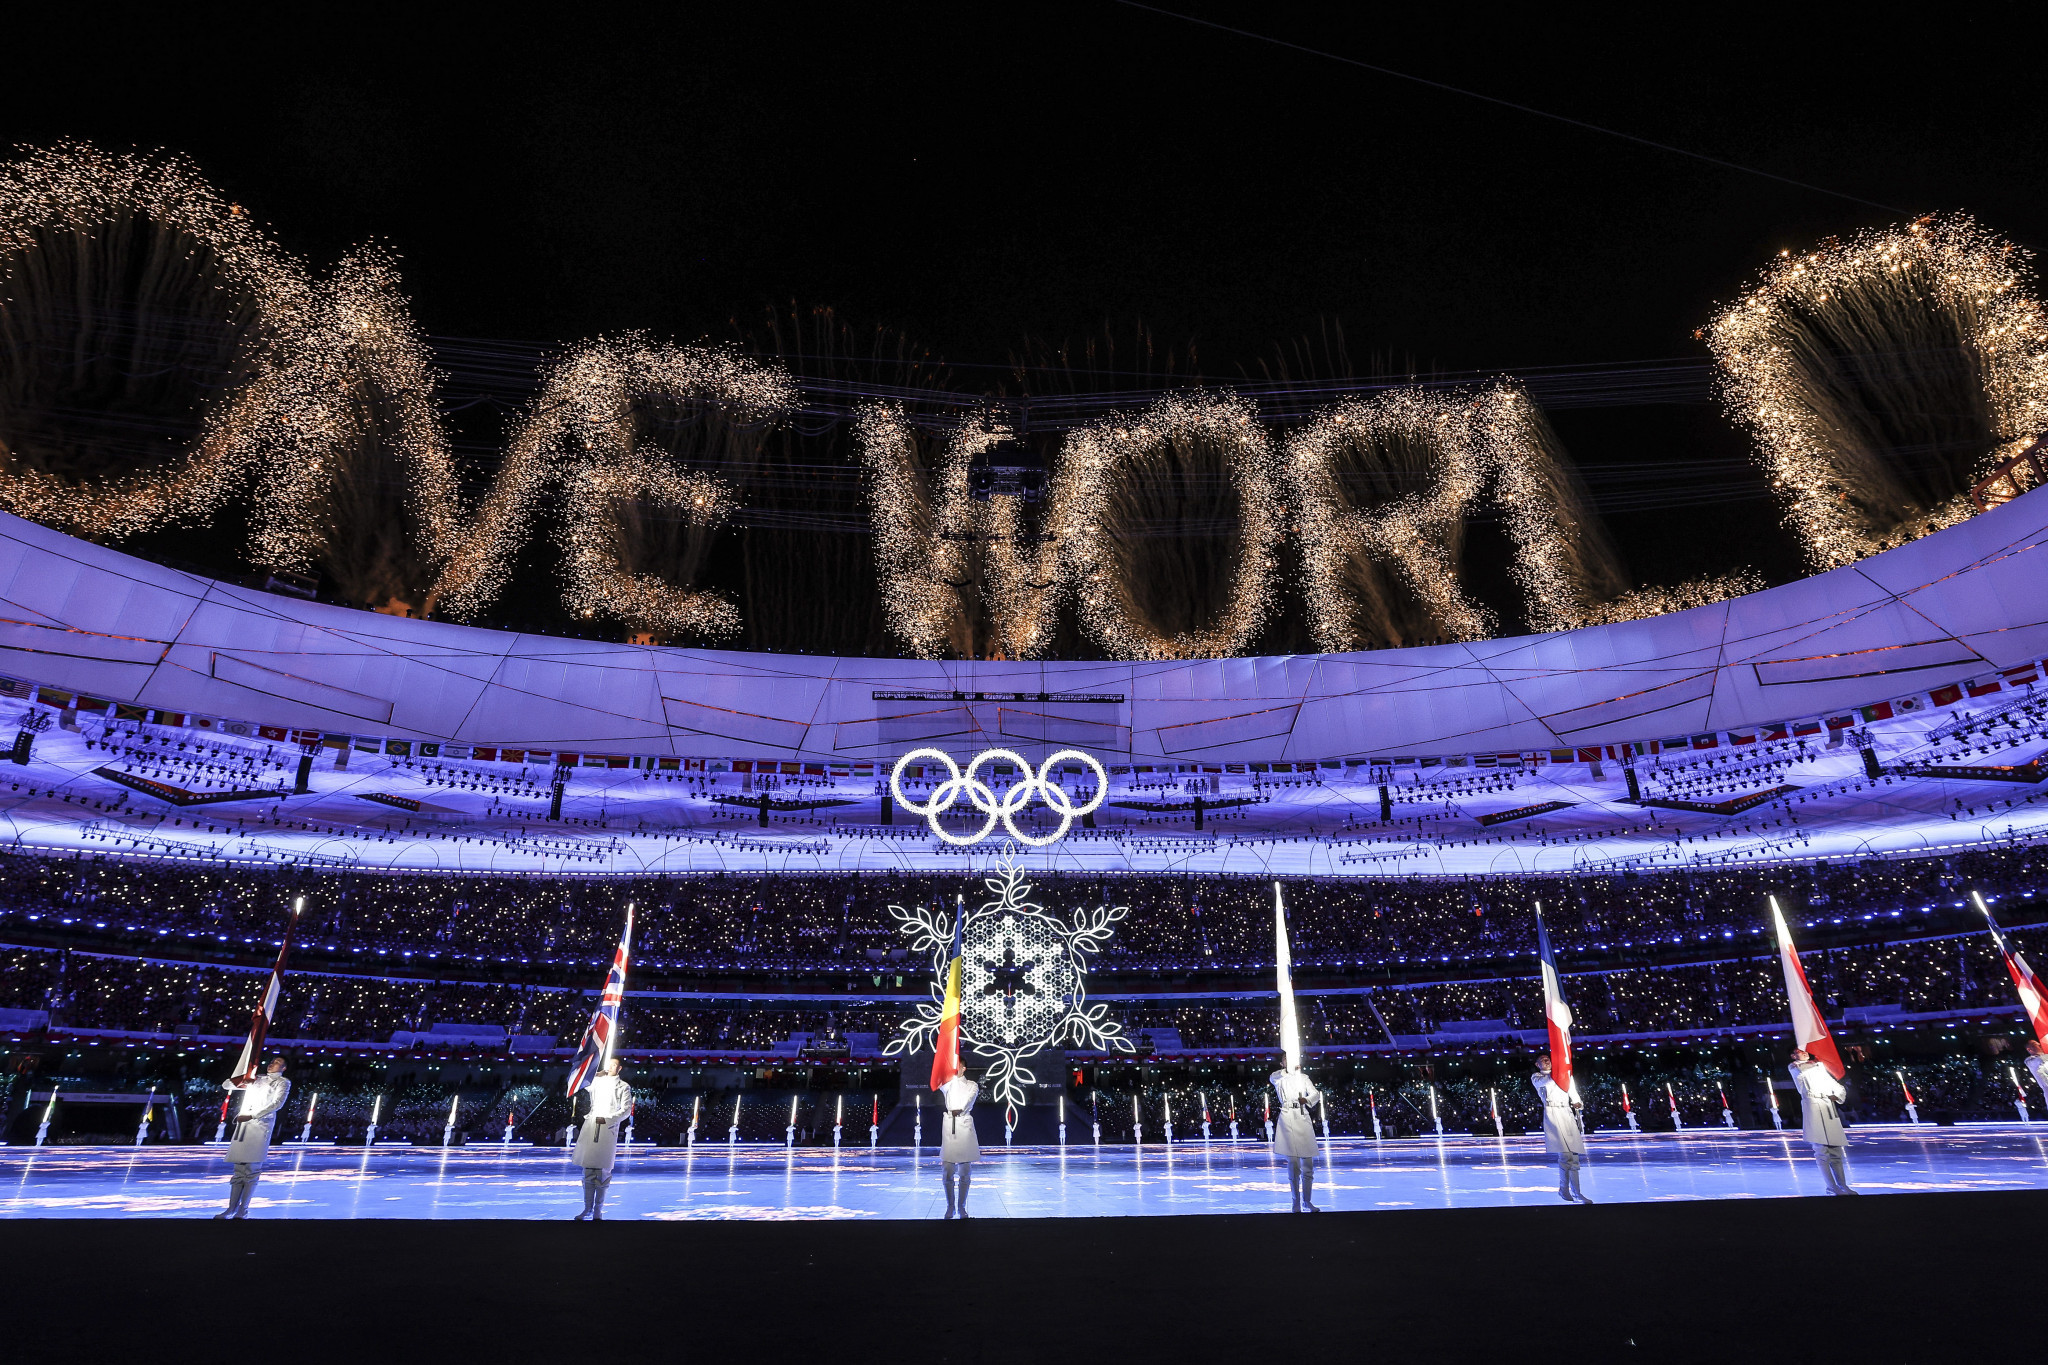 Since its role in the Beijing 2008 Summer Olympics and Paralympics, the Bird's Nest Stadium has subsequently hosted the Opening and Closing Ceremonies for the Beijing 2022 Winter Olympics and Paralympics ©Getty Images